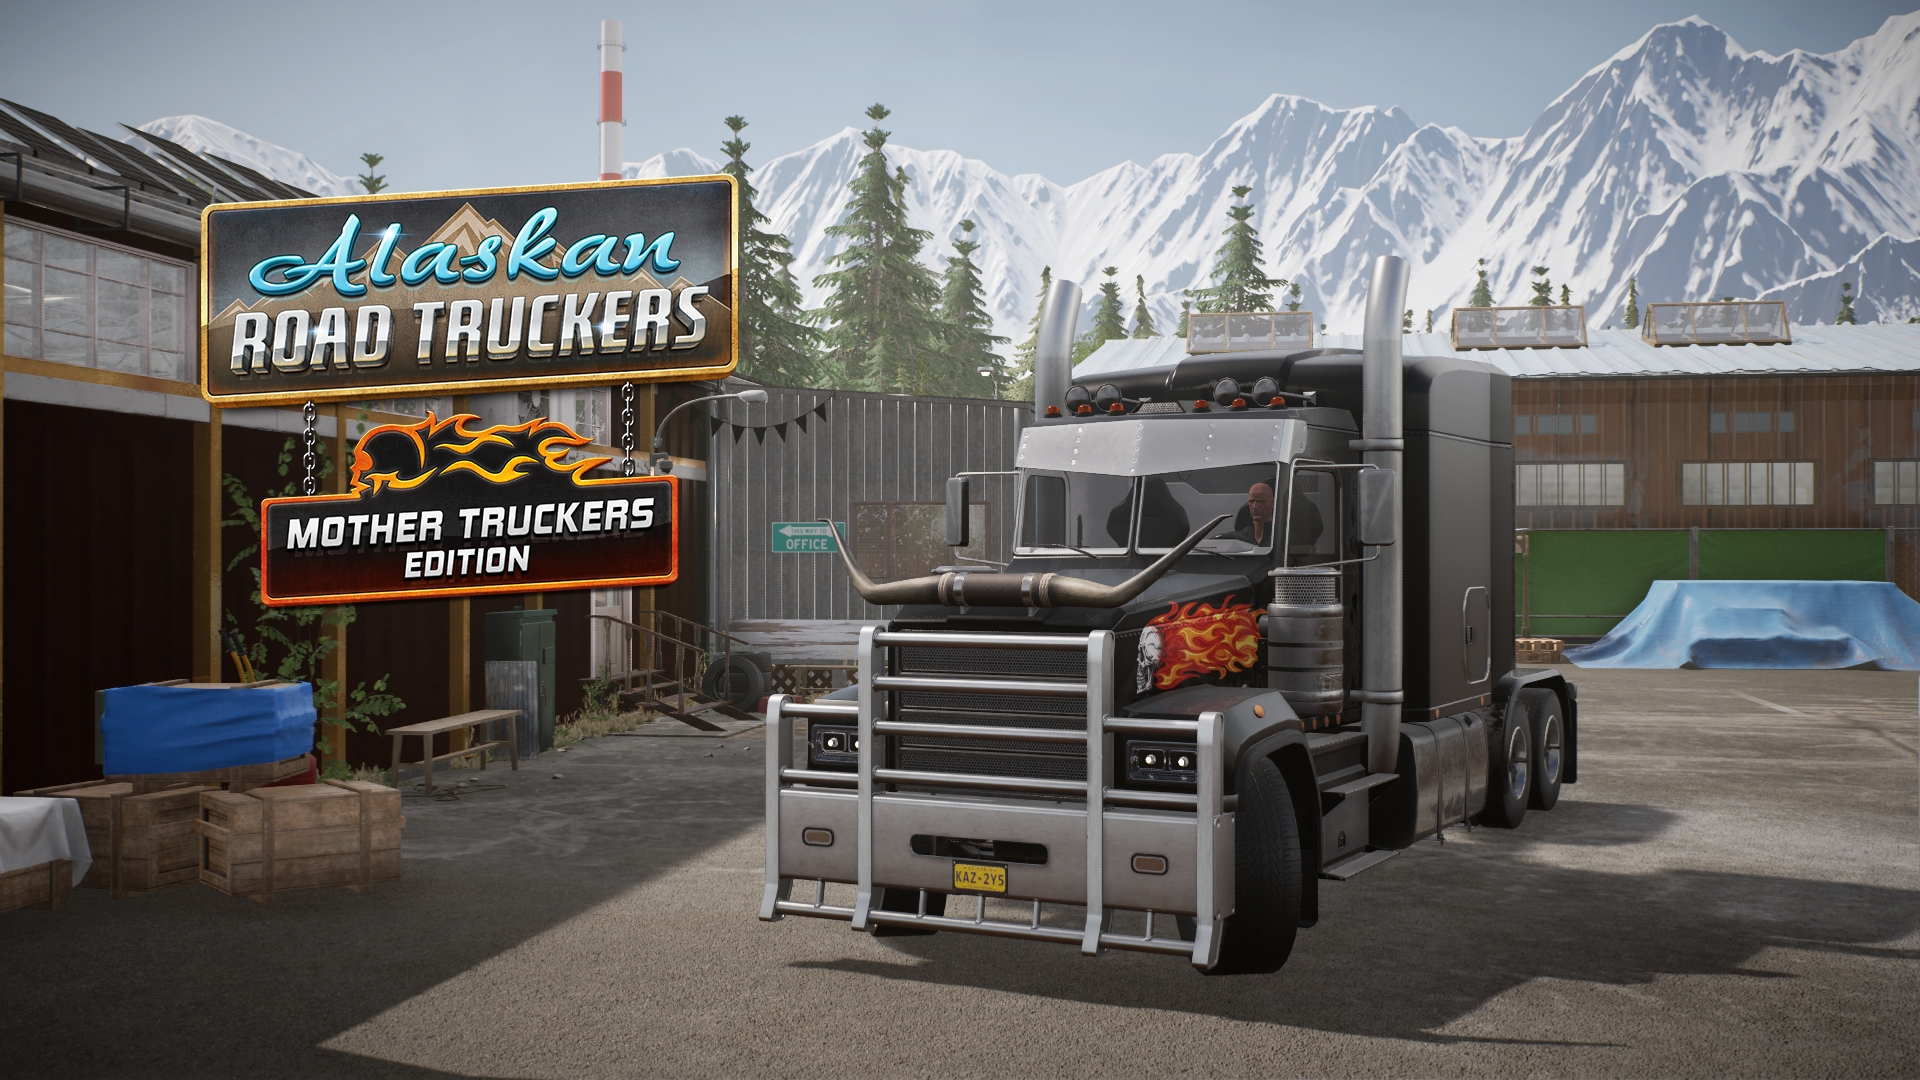 Download Truckers Of Europe 3 News android on PC